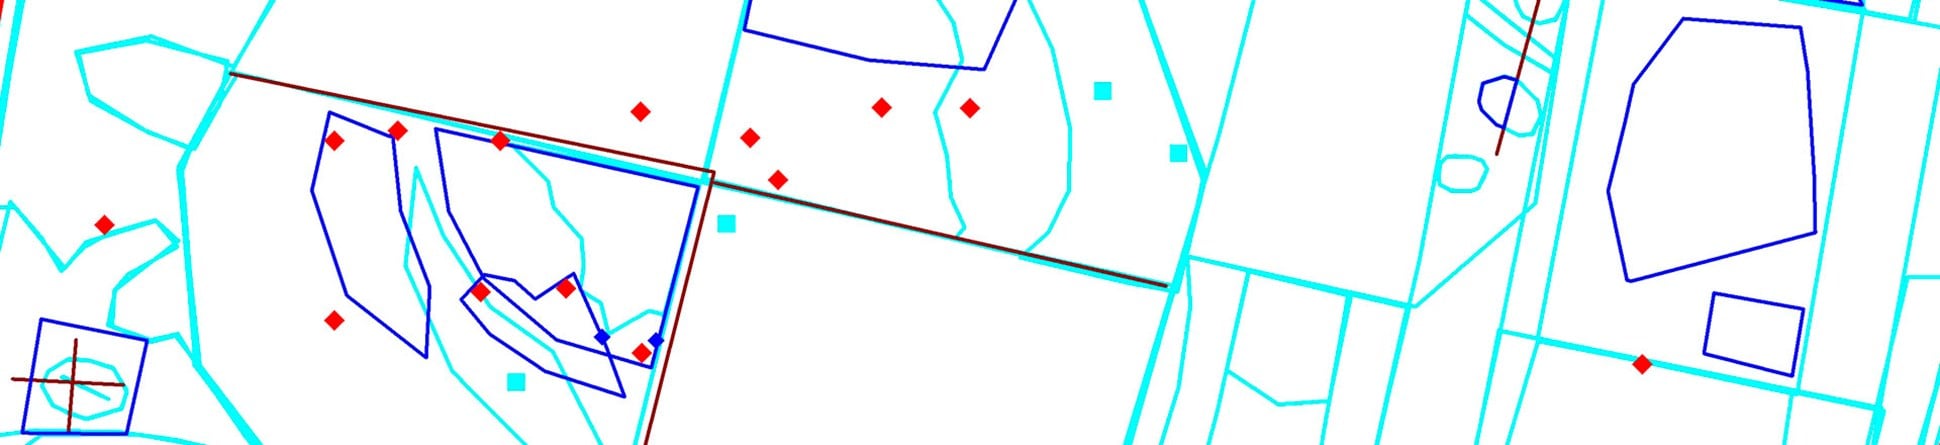 Screenshot showing the point location of finds, lines of sections and outlines of samples and context within a trench